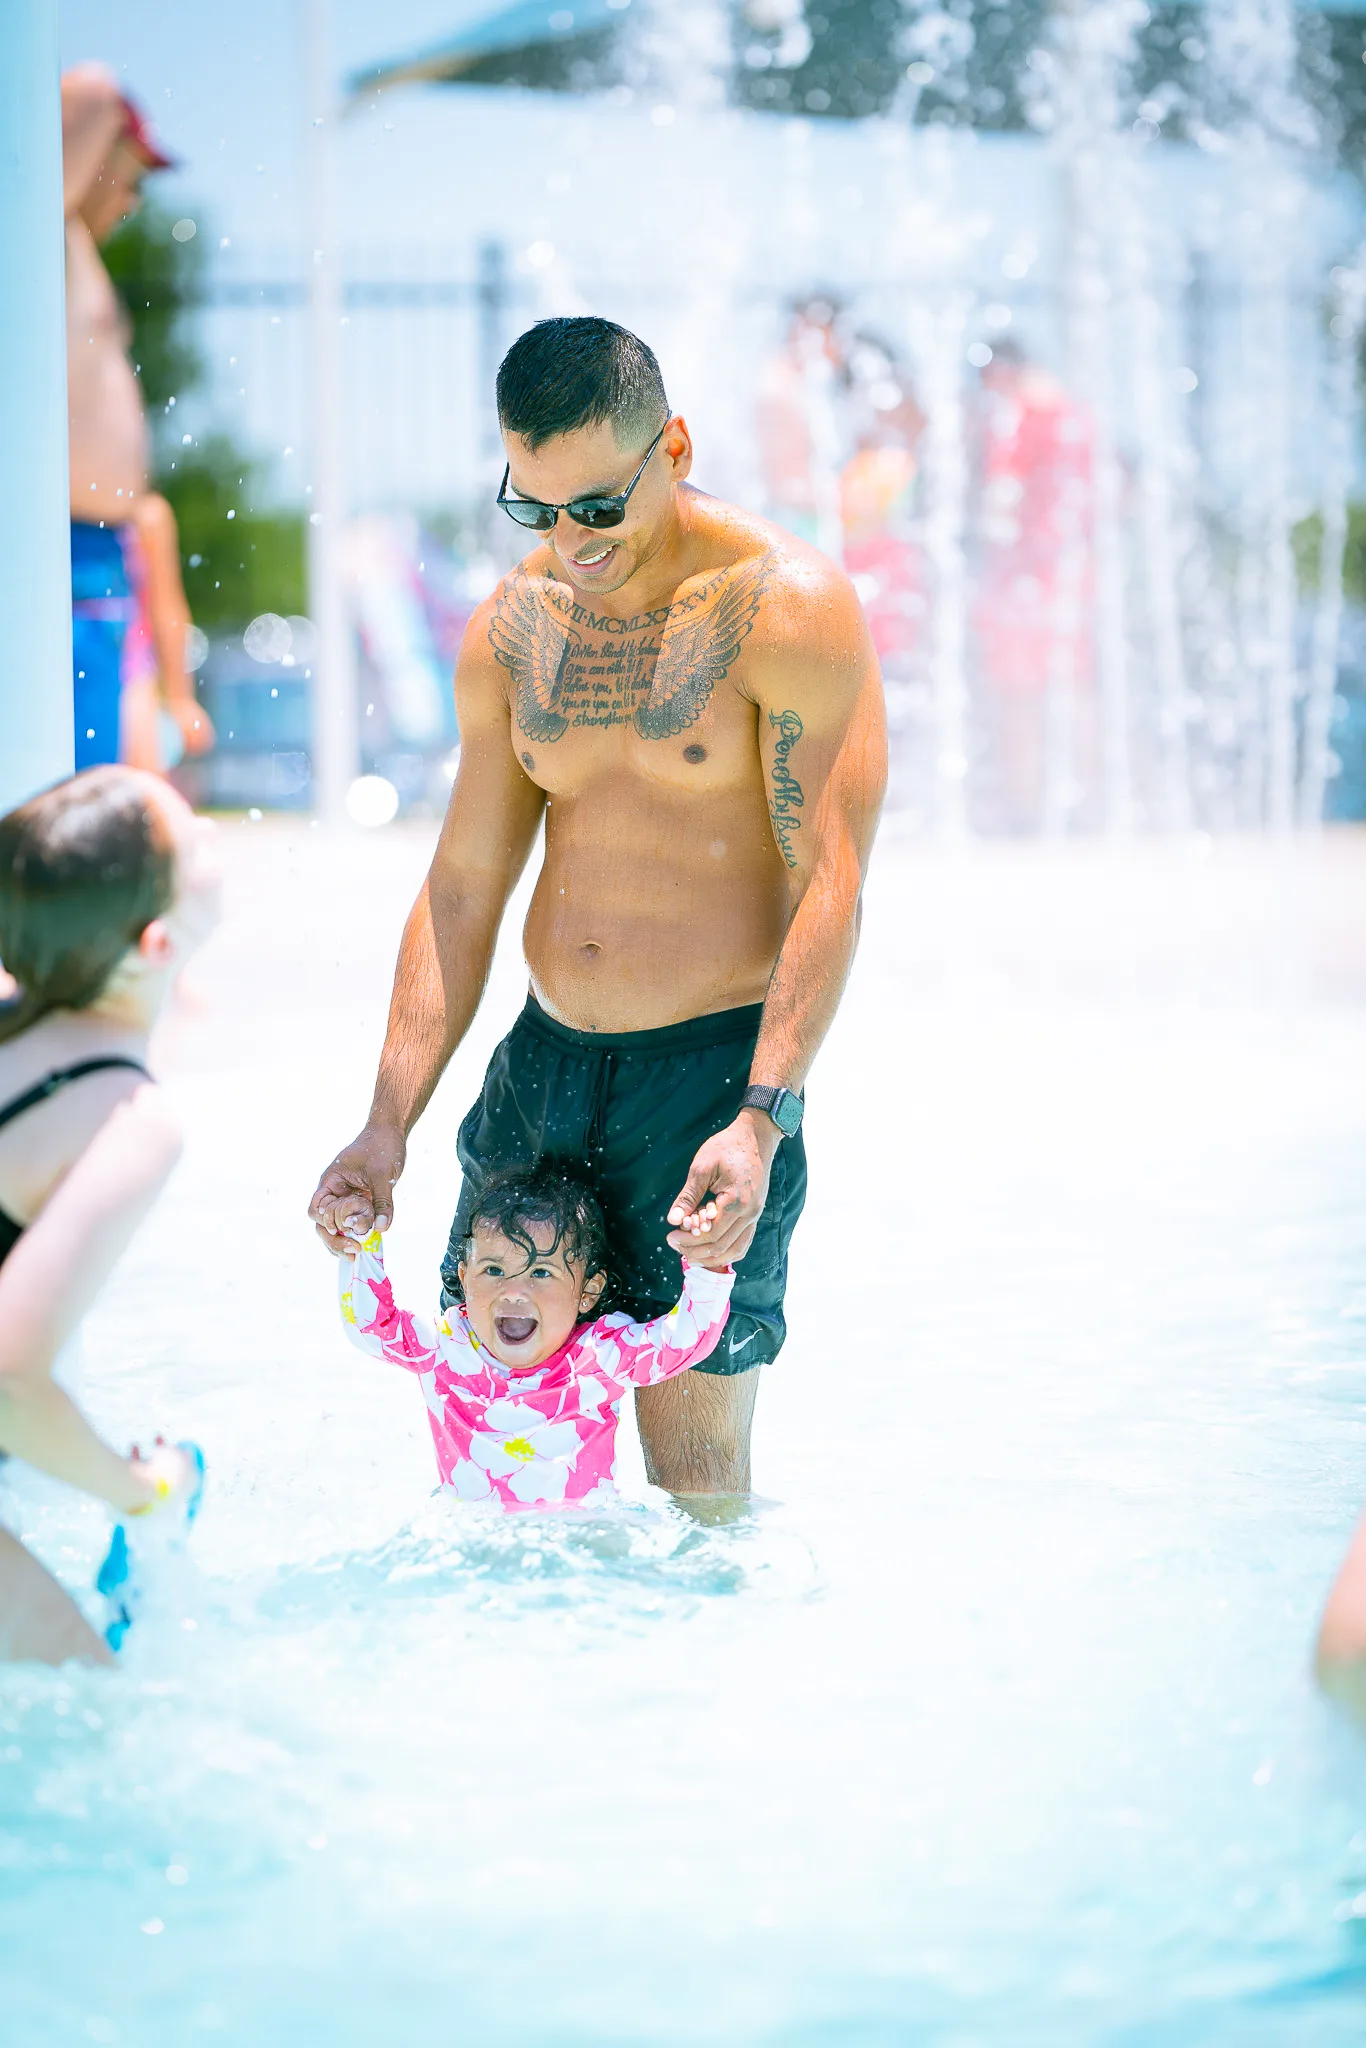 A man stands in an outdoor pool holding his toddler child's hands. The child is smiling with delight.